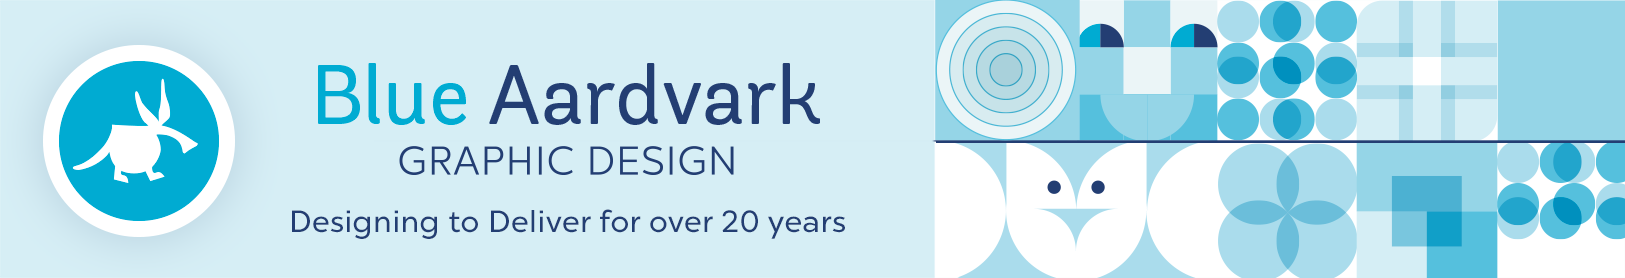 Blue Aardvark .ca designed to deliver for over 20 years. We're glad you're baaaack.